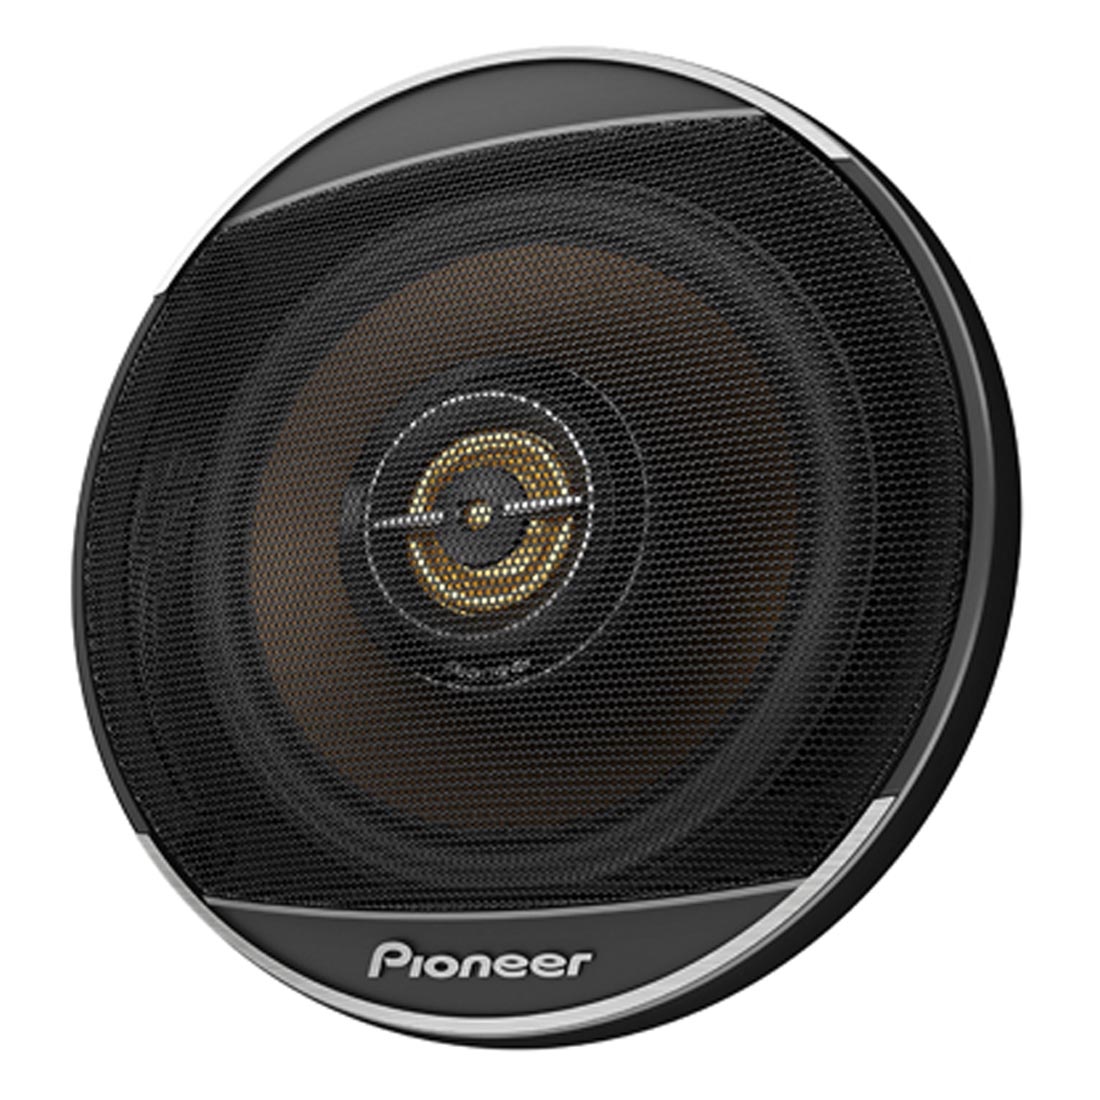 Pioneer TS-A523FH 5″ 2-Way Coaxial Car Speakers